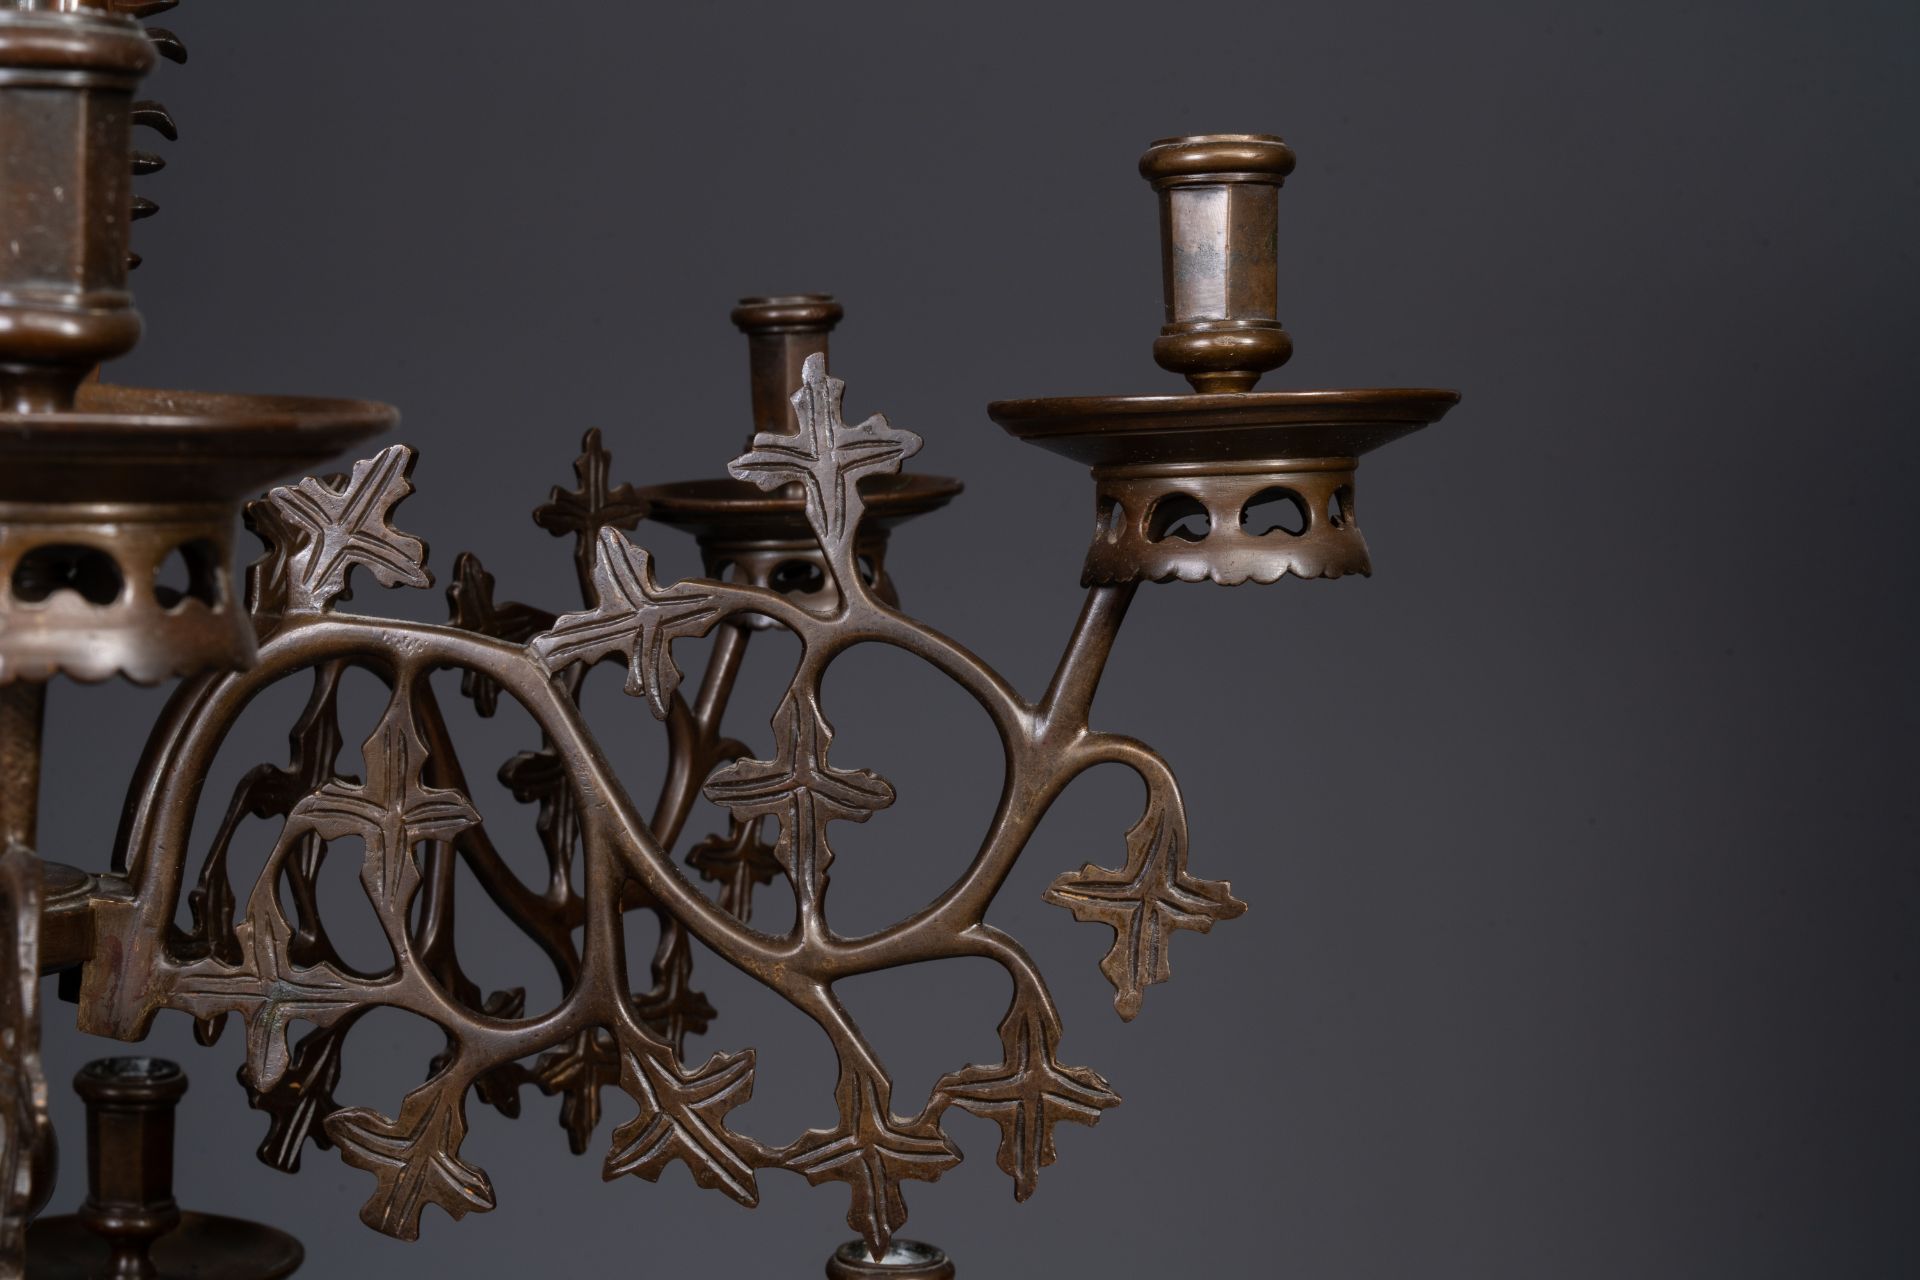 A Flemish or Dutch bronze Gothic Revival large bronze 'Madonna and Child' chandelier, 19th C. - Image 7 of 8